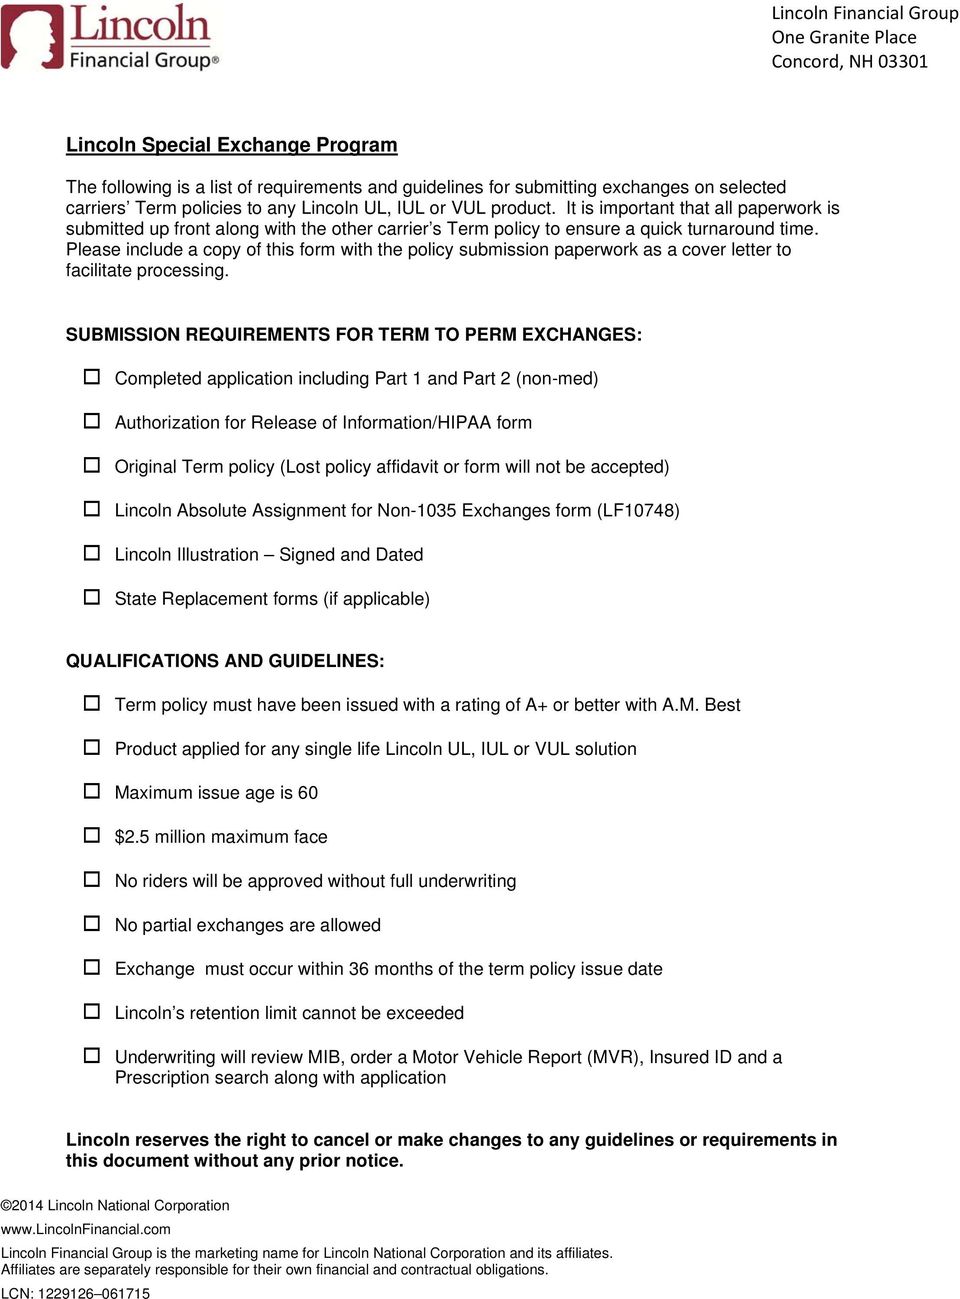 Please include a copy of this form with the policy submission paperwork as a cover letter to facilitate processing.